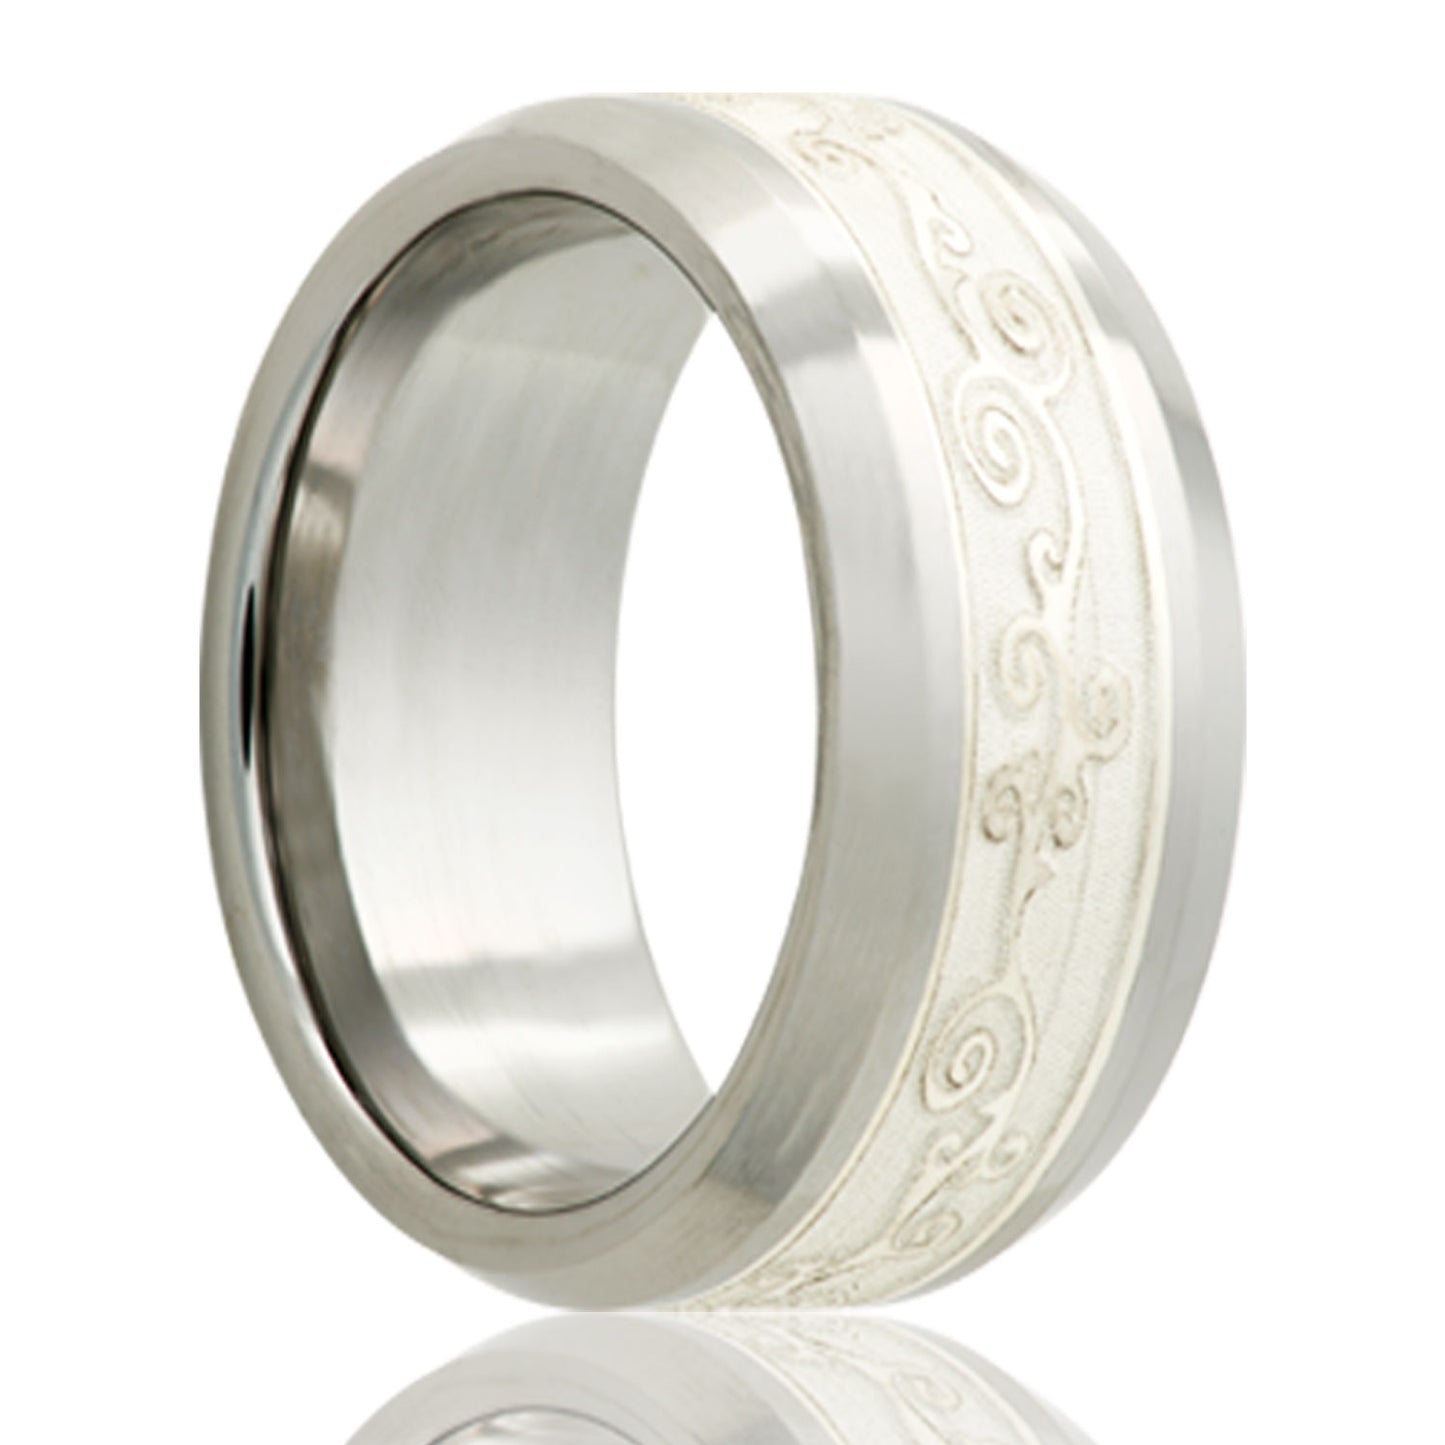 A scroll pattern silver inlay cobalt men's wedding band with beveled edges displayed on a neutral white background.